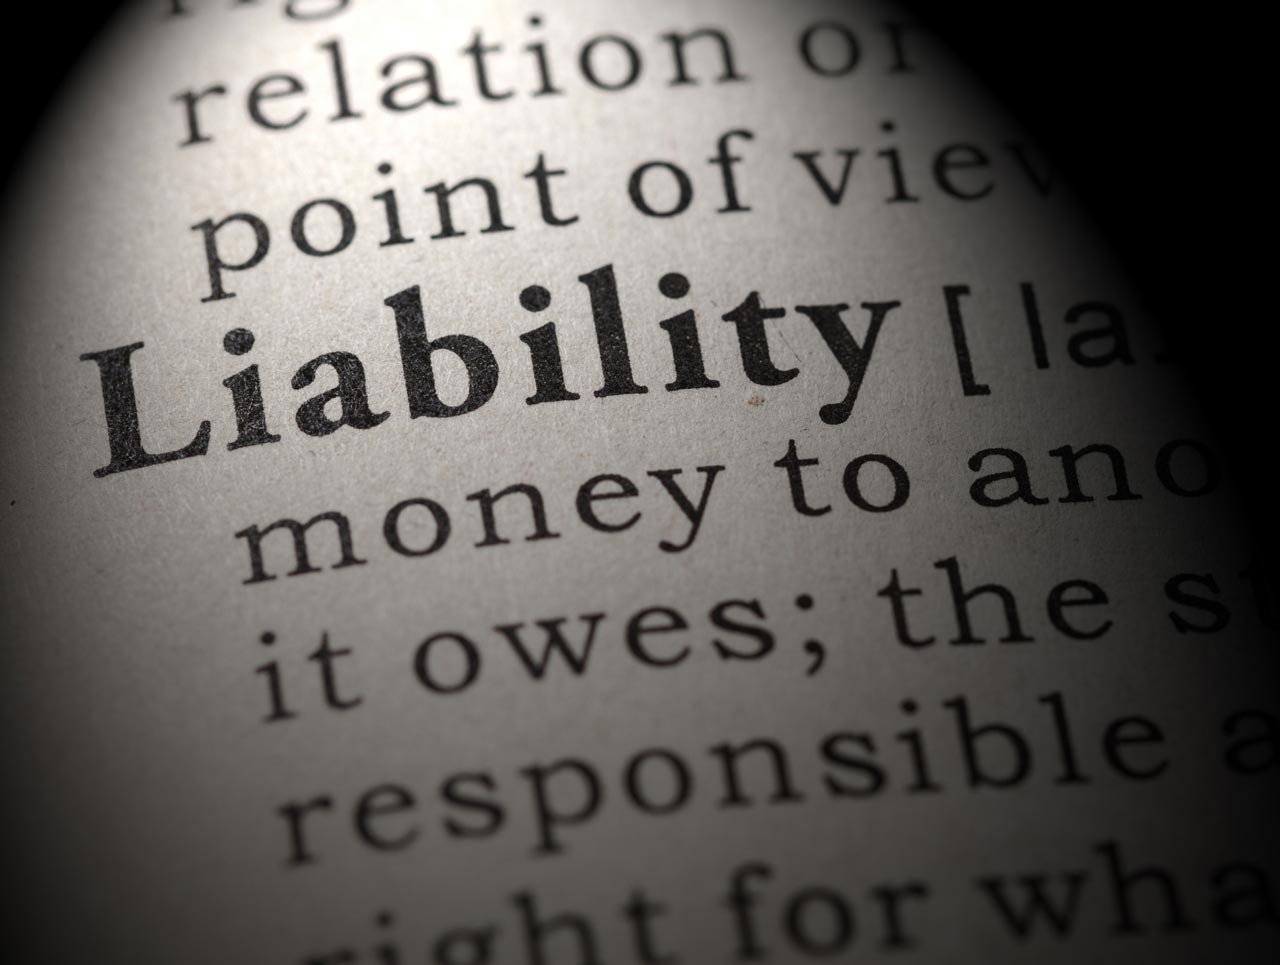 Primary Liability vs General Liability: What’s the Difference?